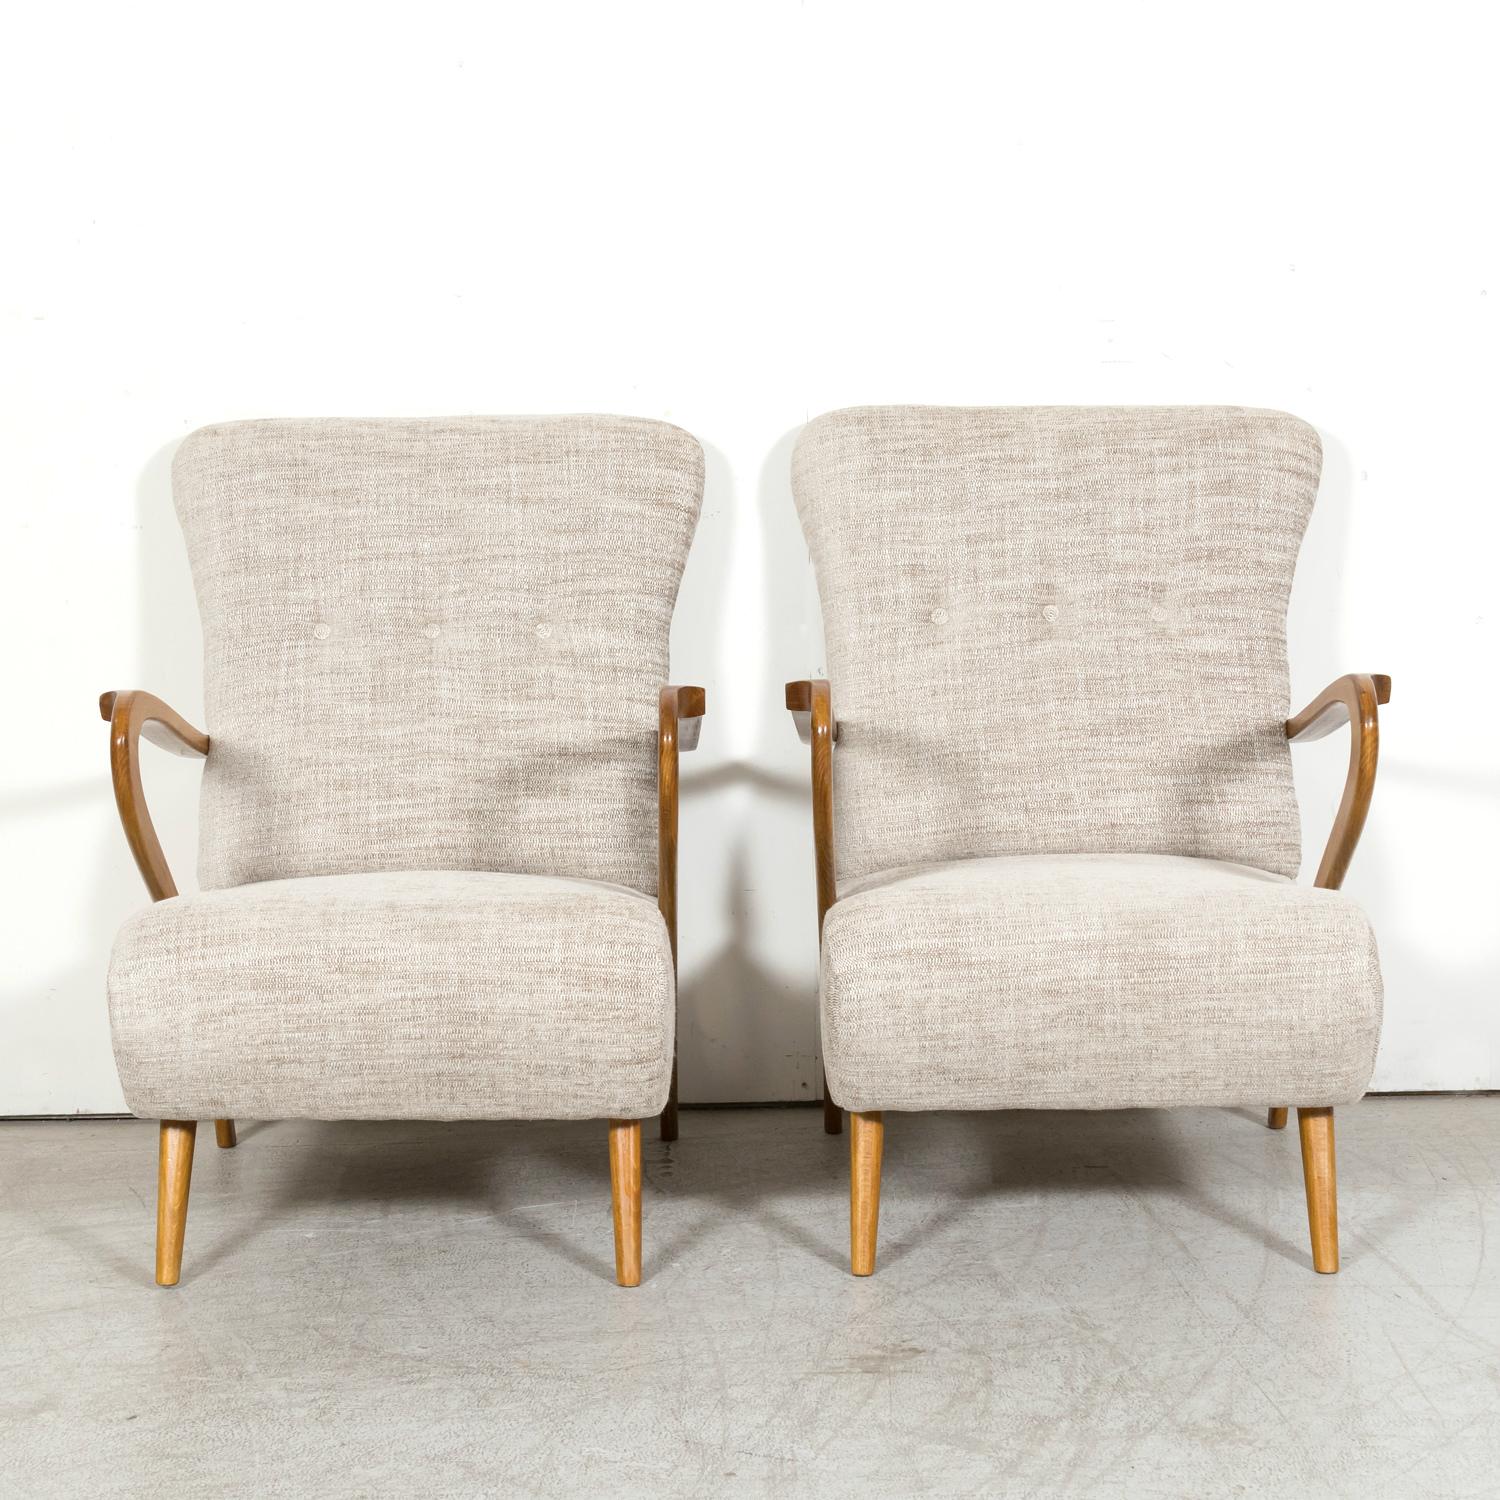 A distinctive pair of mid-Century modern Italian armchairs in the style of Paolo Buffa, a fine Italian manufacturer, circa 1950s. Having high backrests with a gentle incline that offers comfort and support, sculpted sinuous hardwood arms, and short